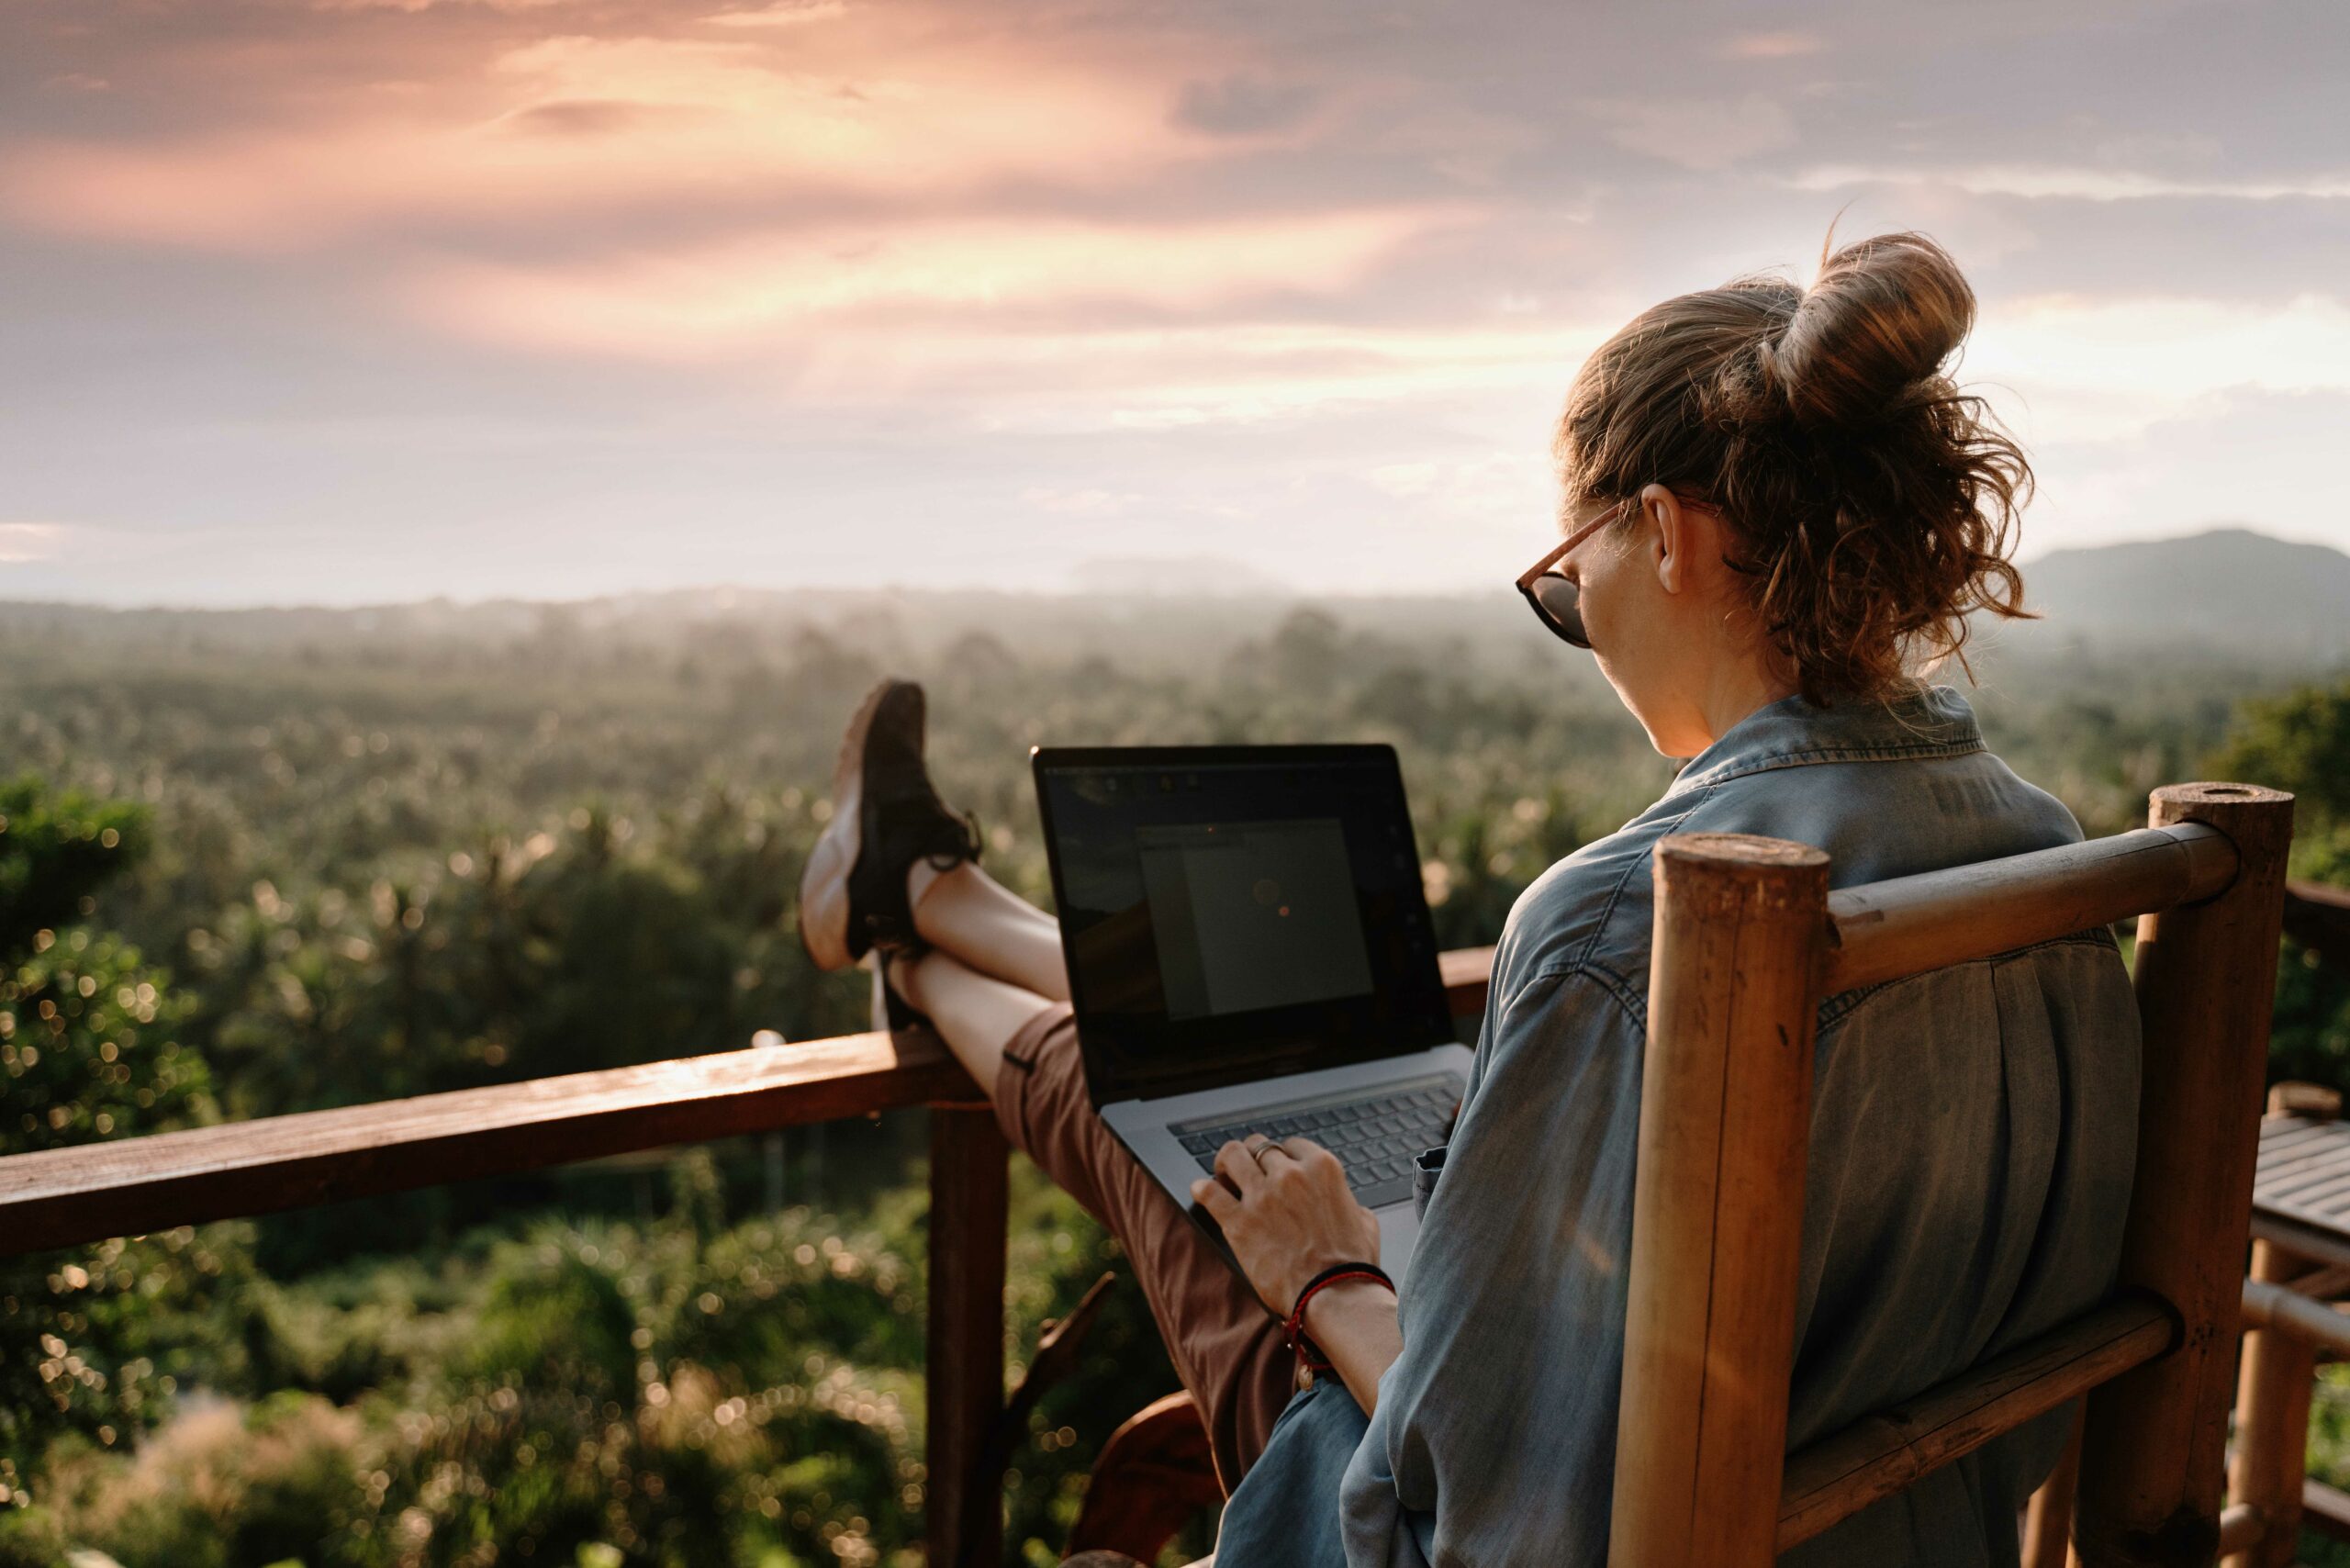 How to manage work-life balance when working remotely